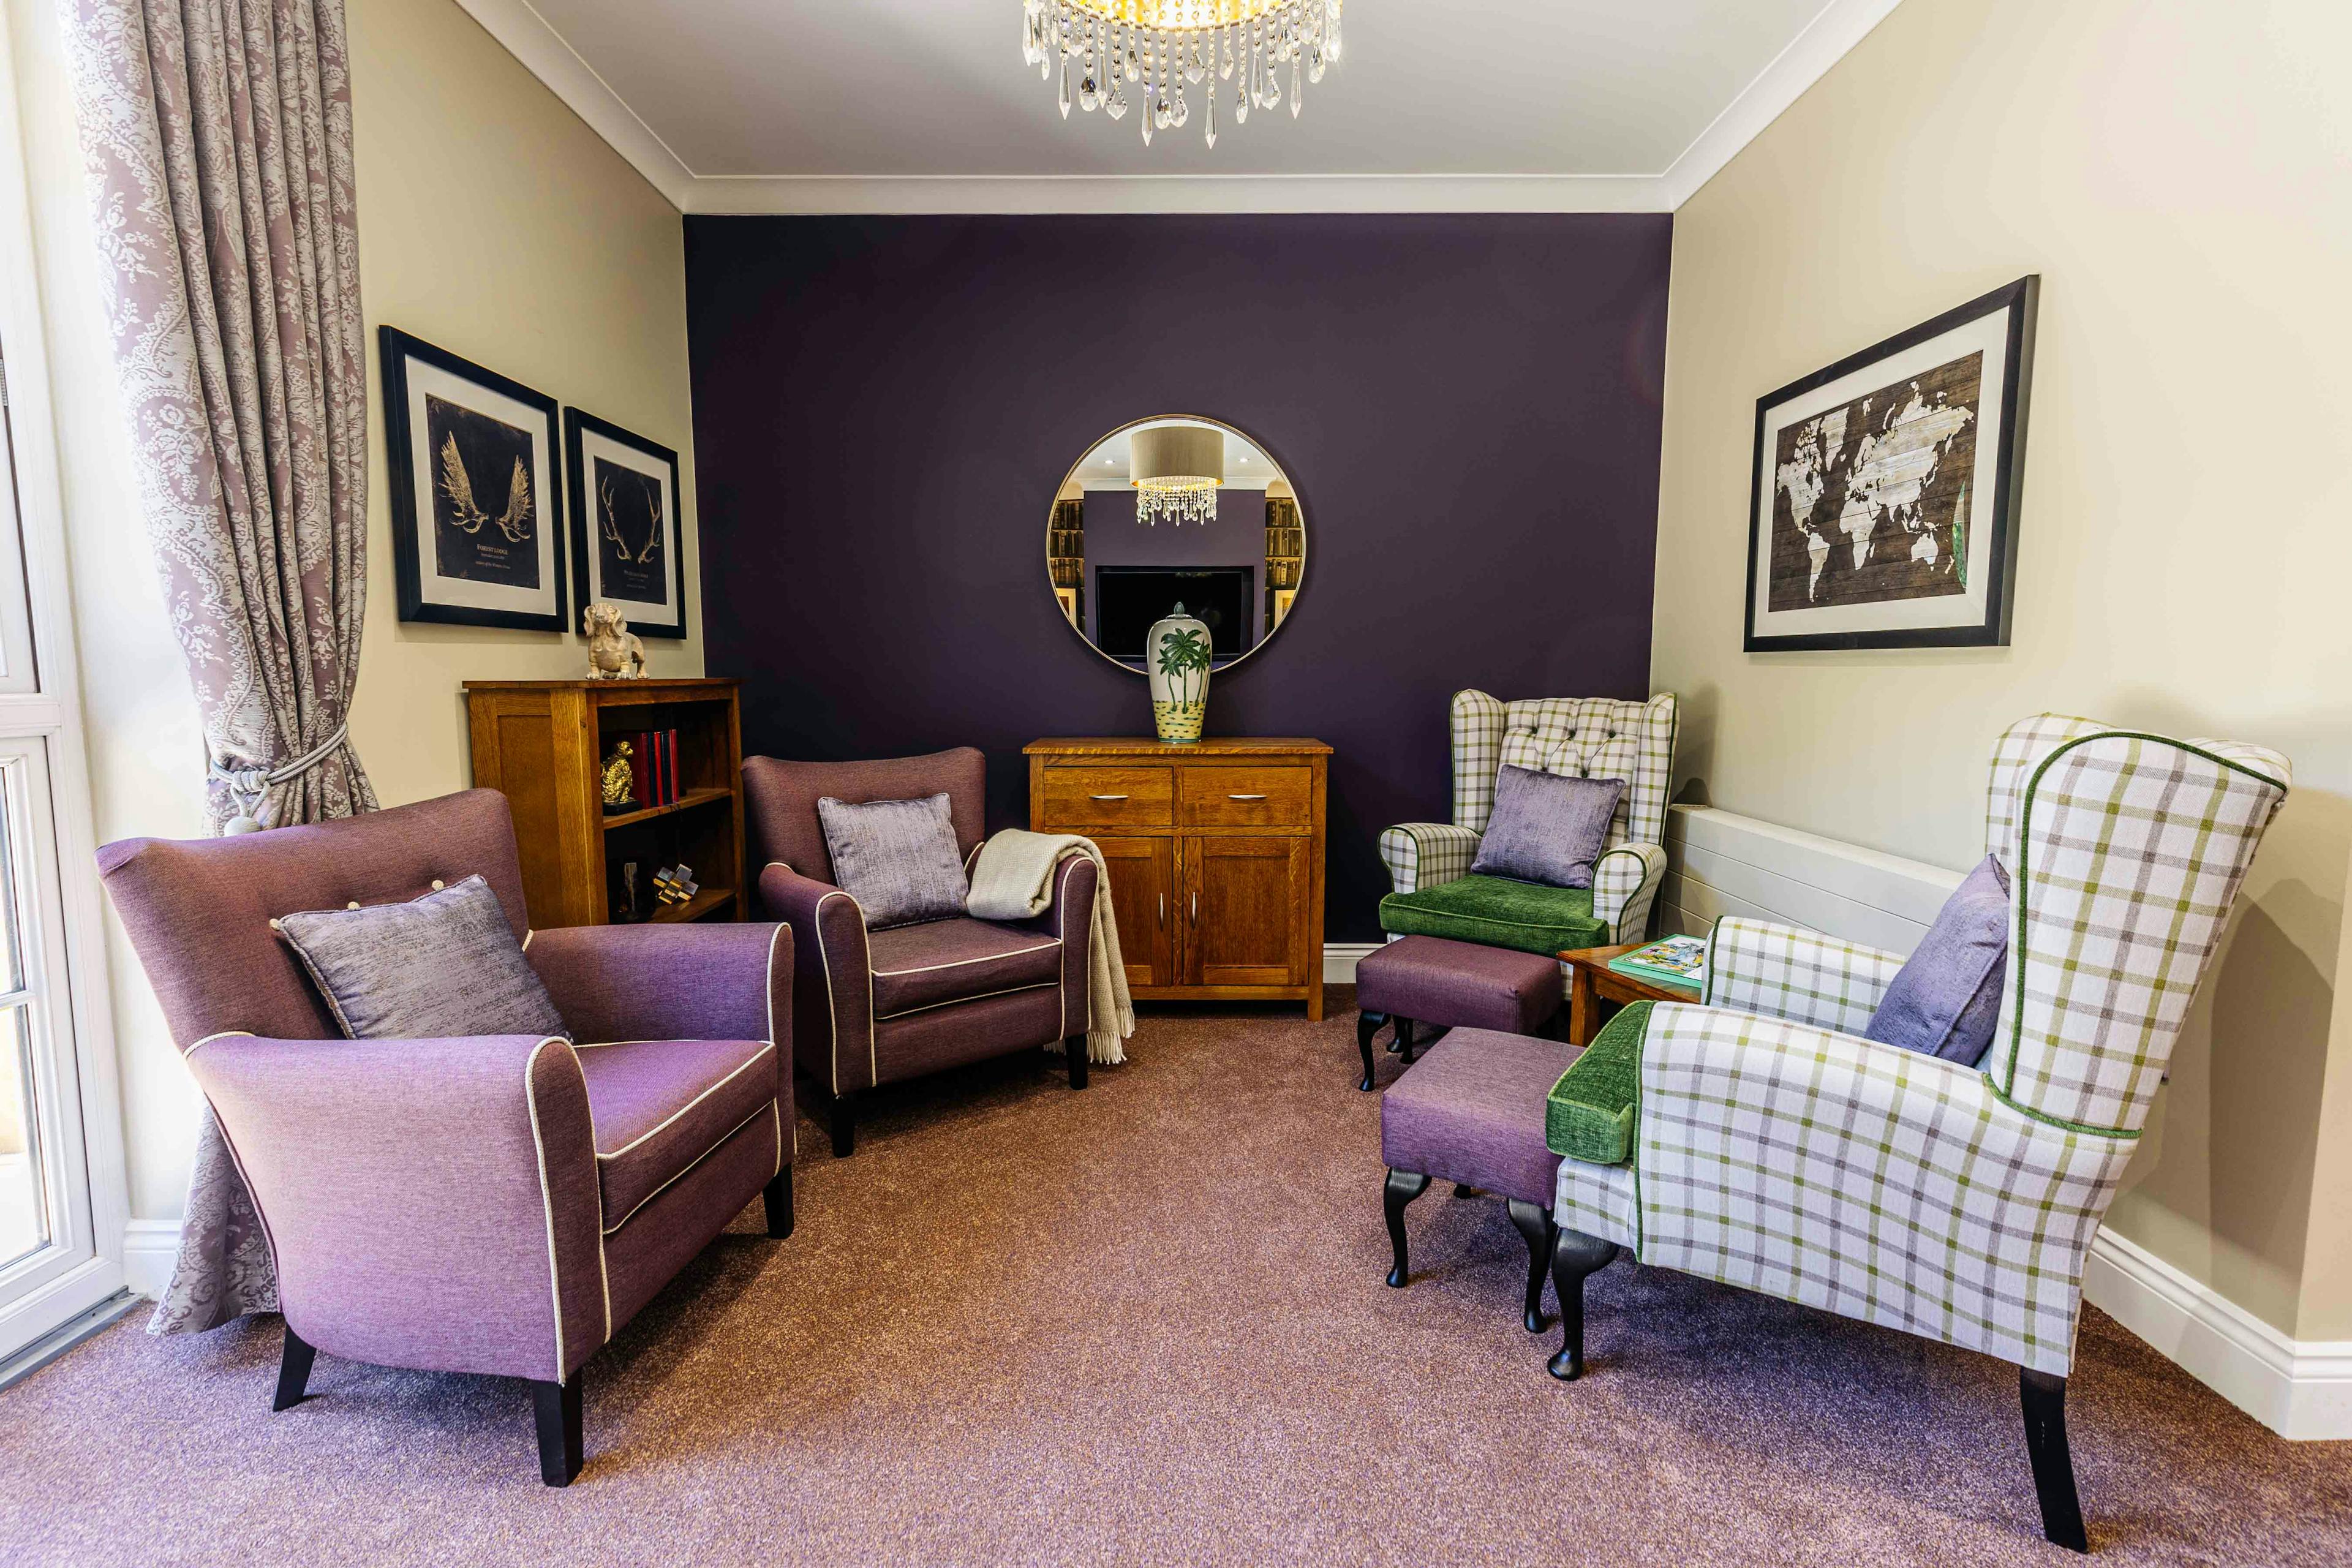 Communal area at Worplesdon View Care Home in Guildford, Surrey